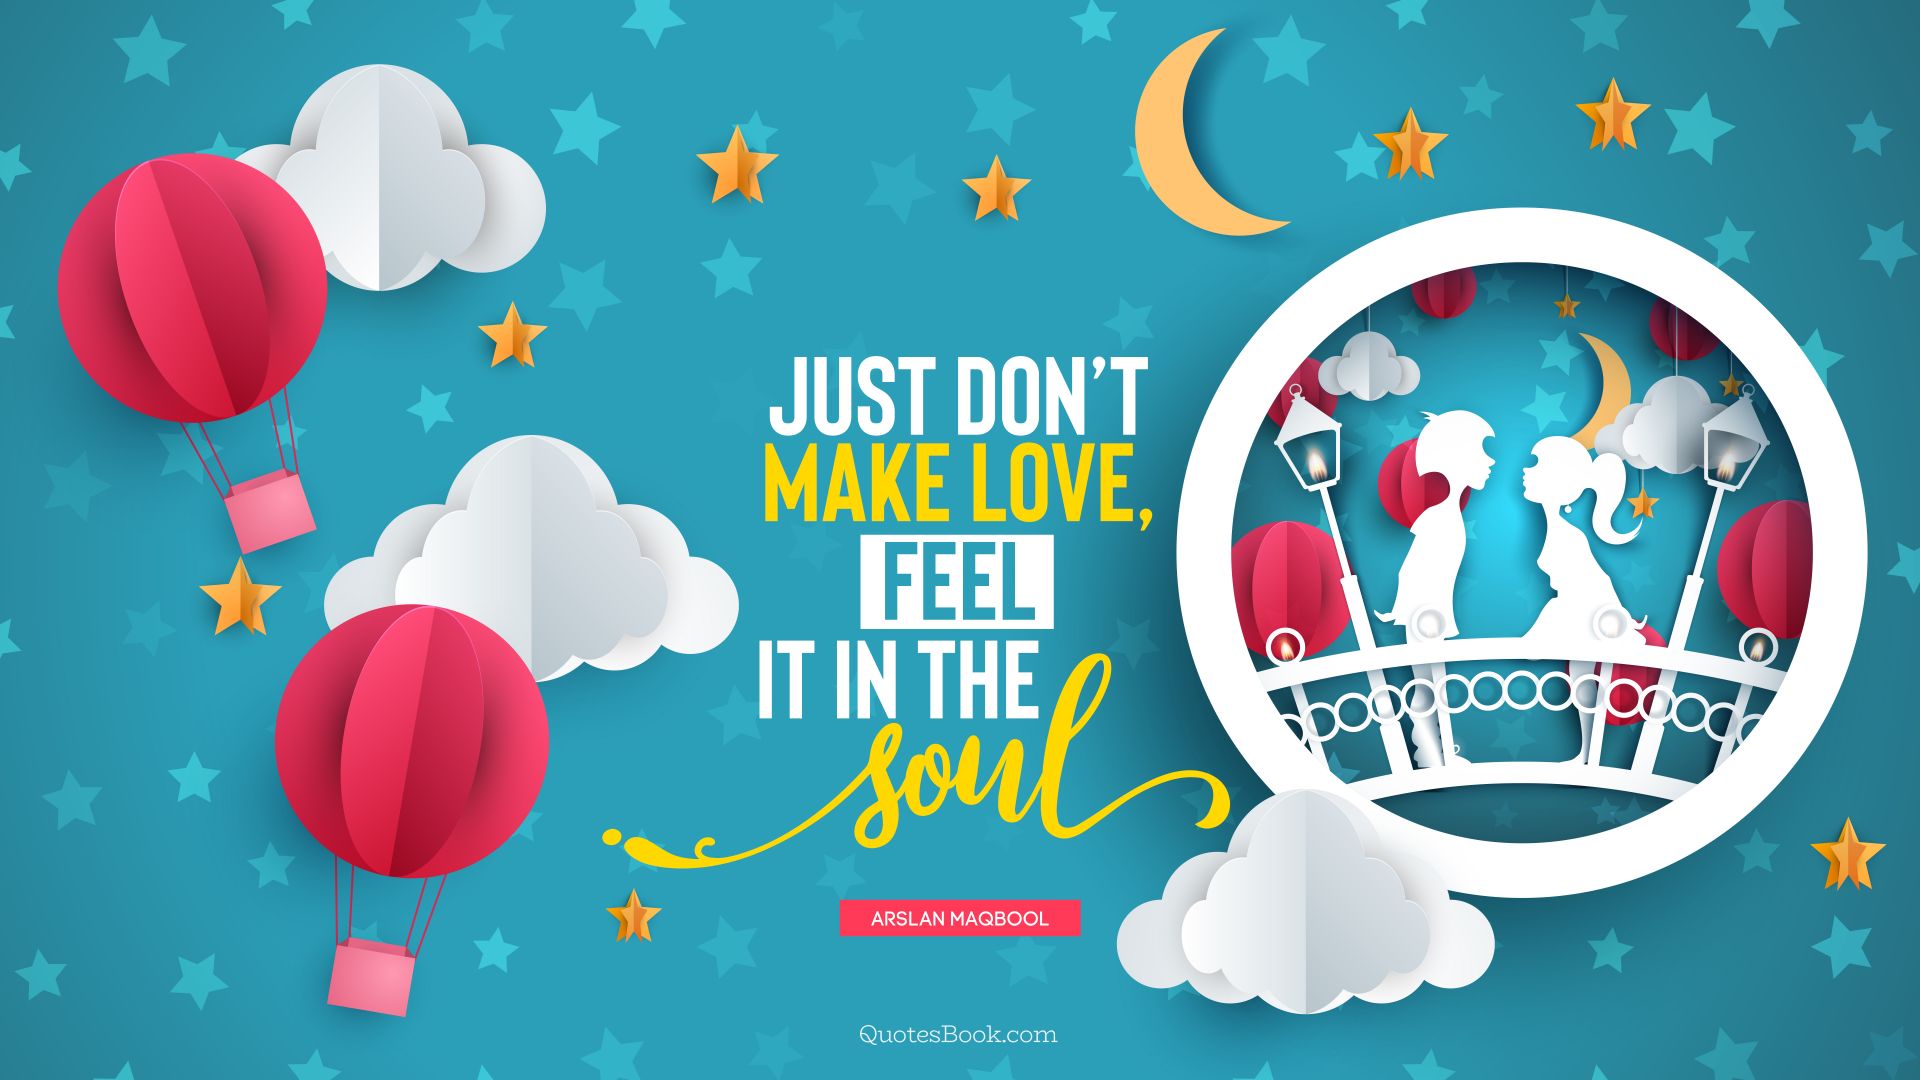 Just don’t make love, feel it in the soul. - Quote by Arslan Maqbool